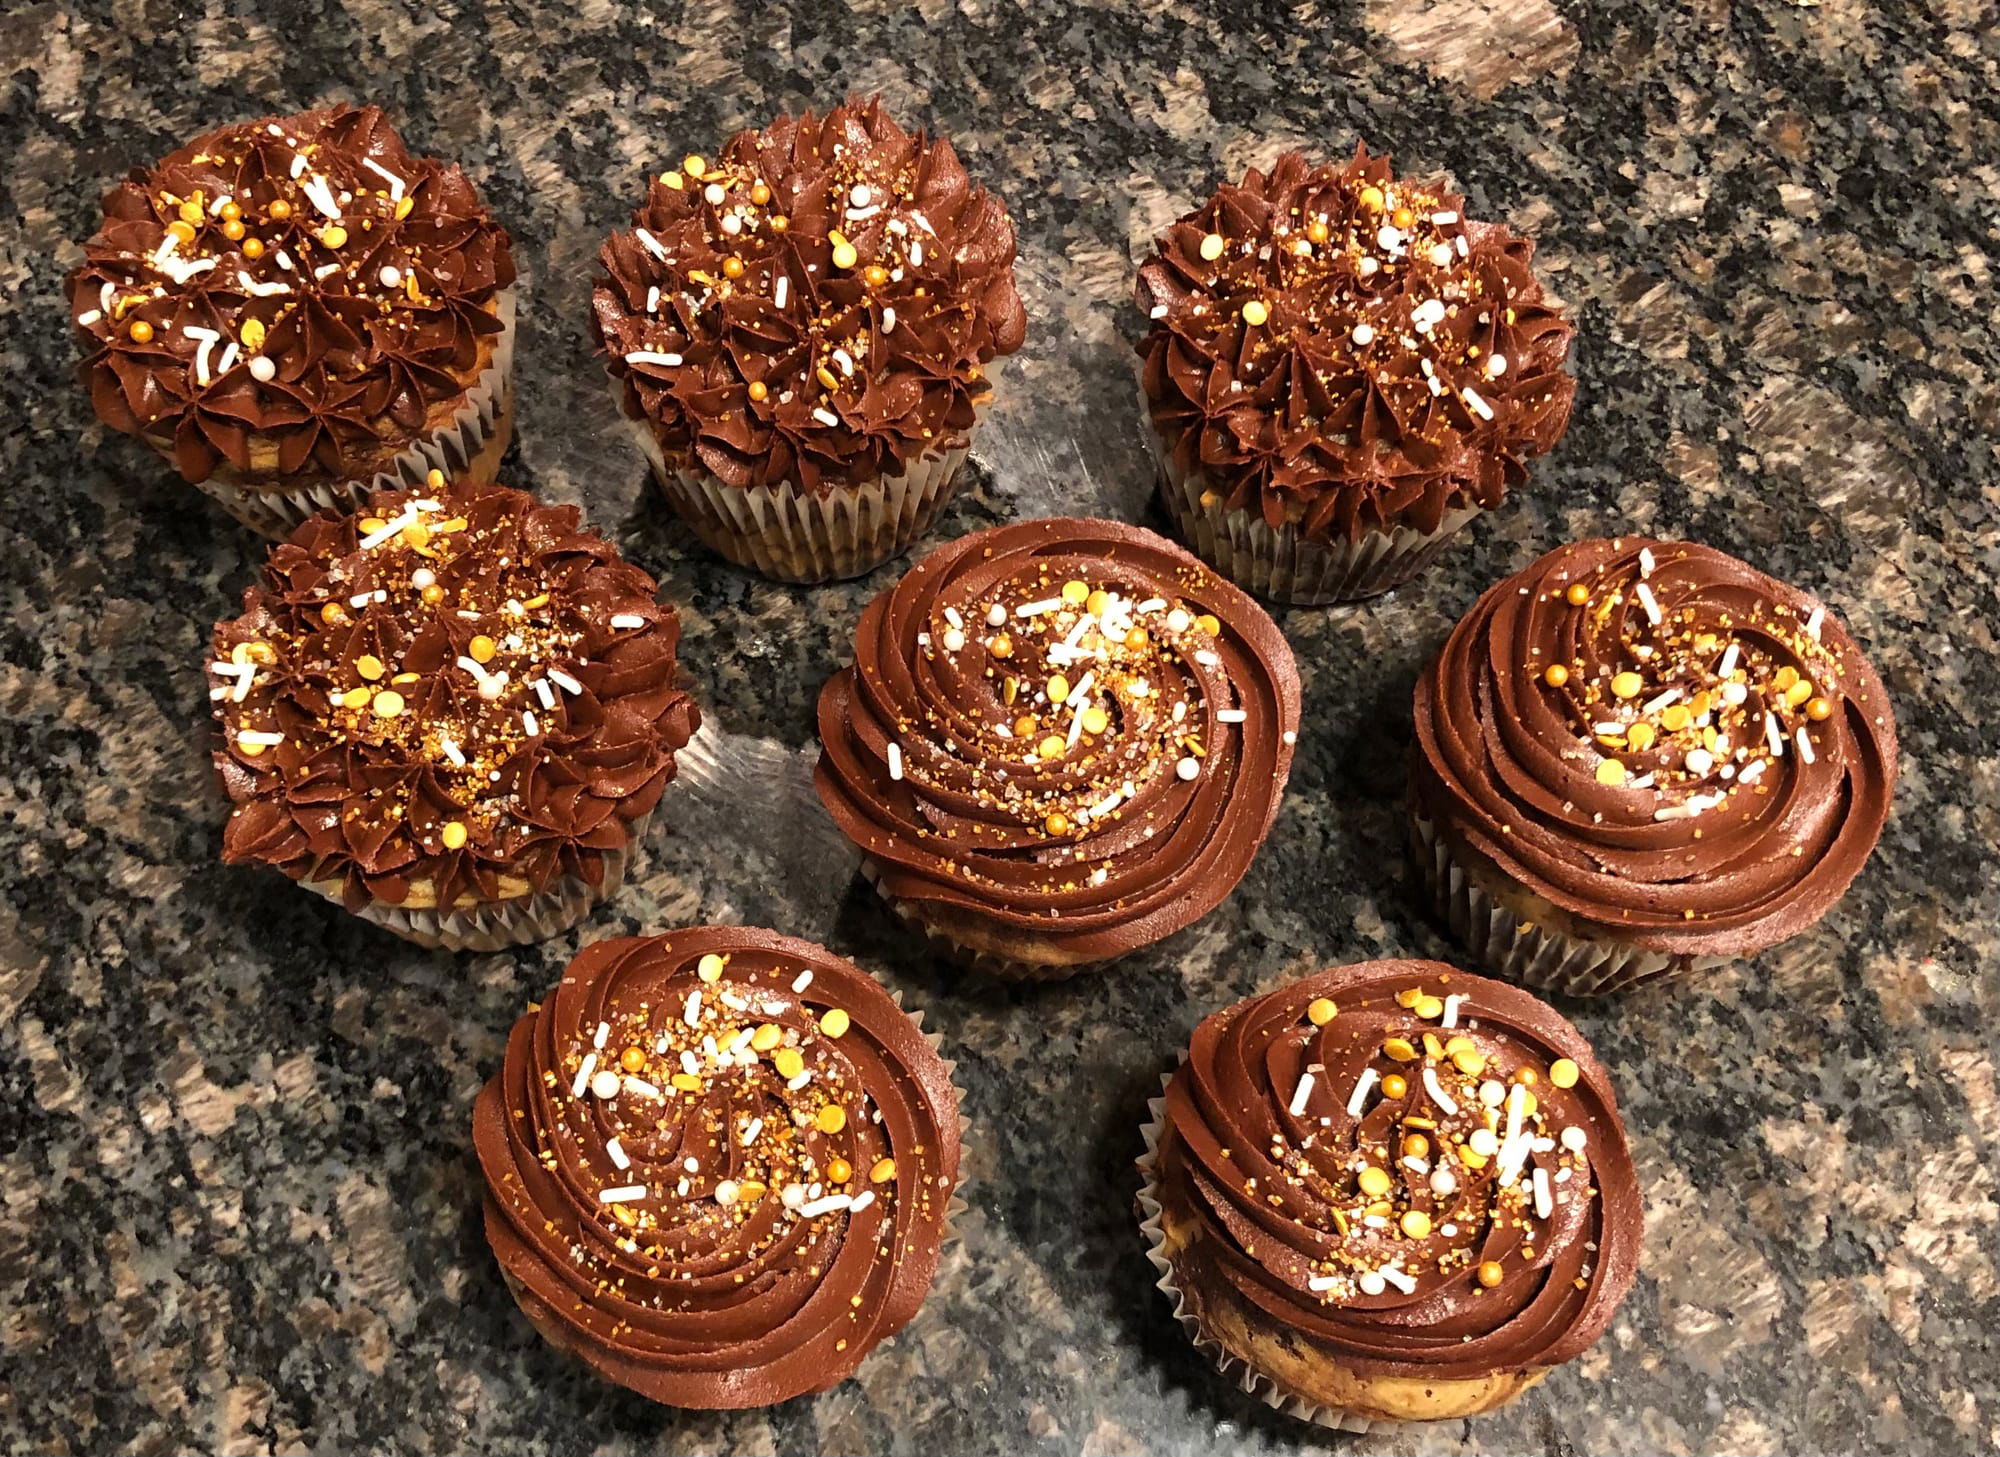 Marble Cupcakes With Chocolate Fudge Buttercream Frosting